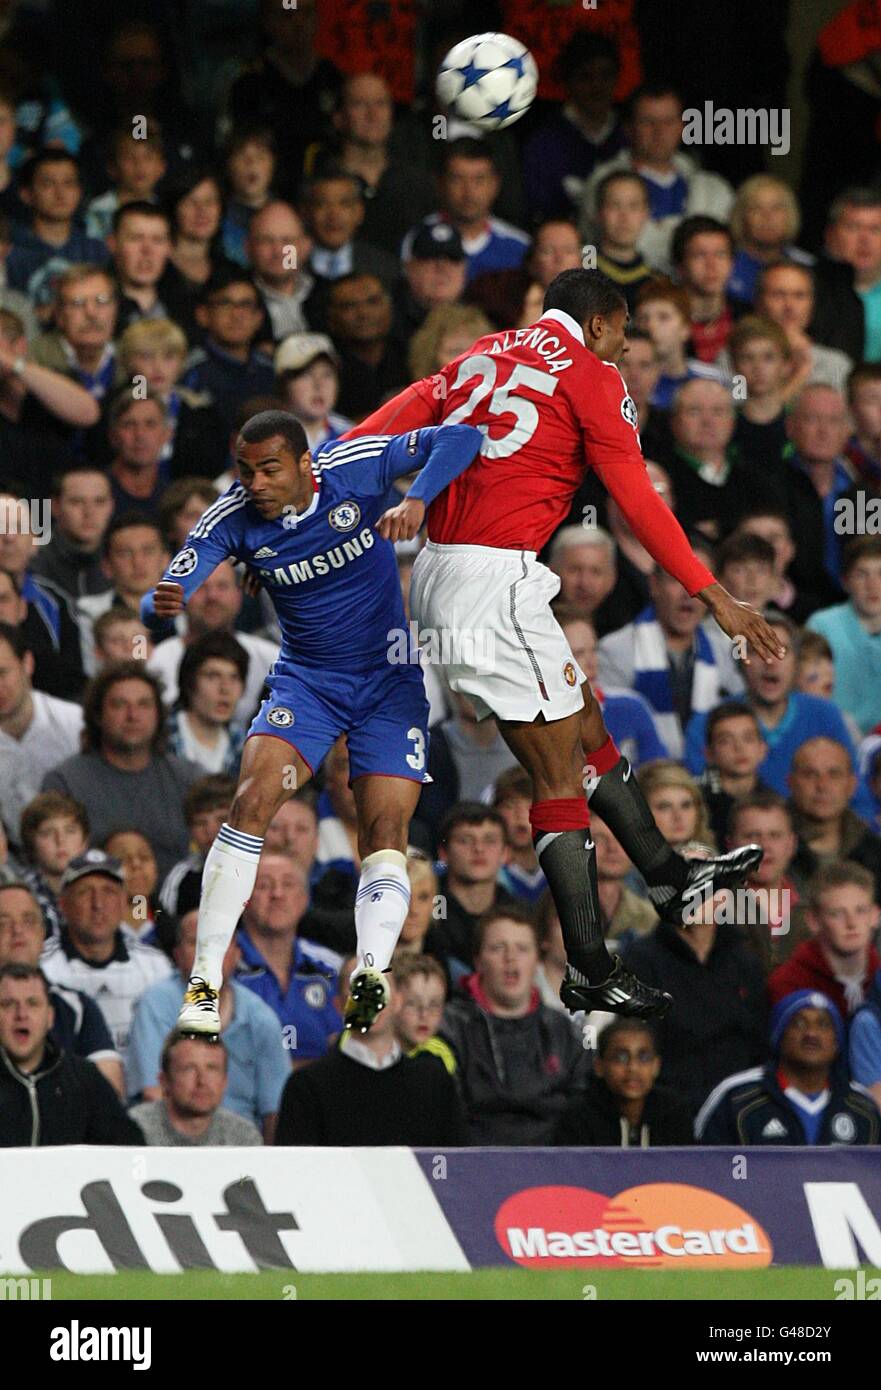 Soccer - UEFA Champions League - Quarter Final - First Leg - Chelsea v Manchester United - Stamford Bridge. Manchester United's Antonio Valencia (right) and Chelsea's Ashley Cole (left) battle for the ball in the air Stock Photo